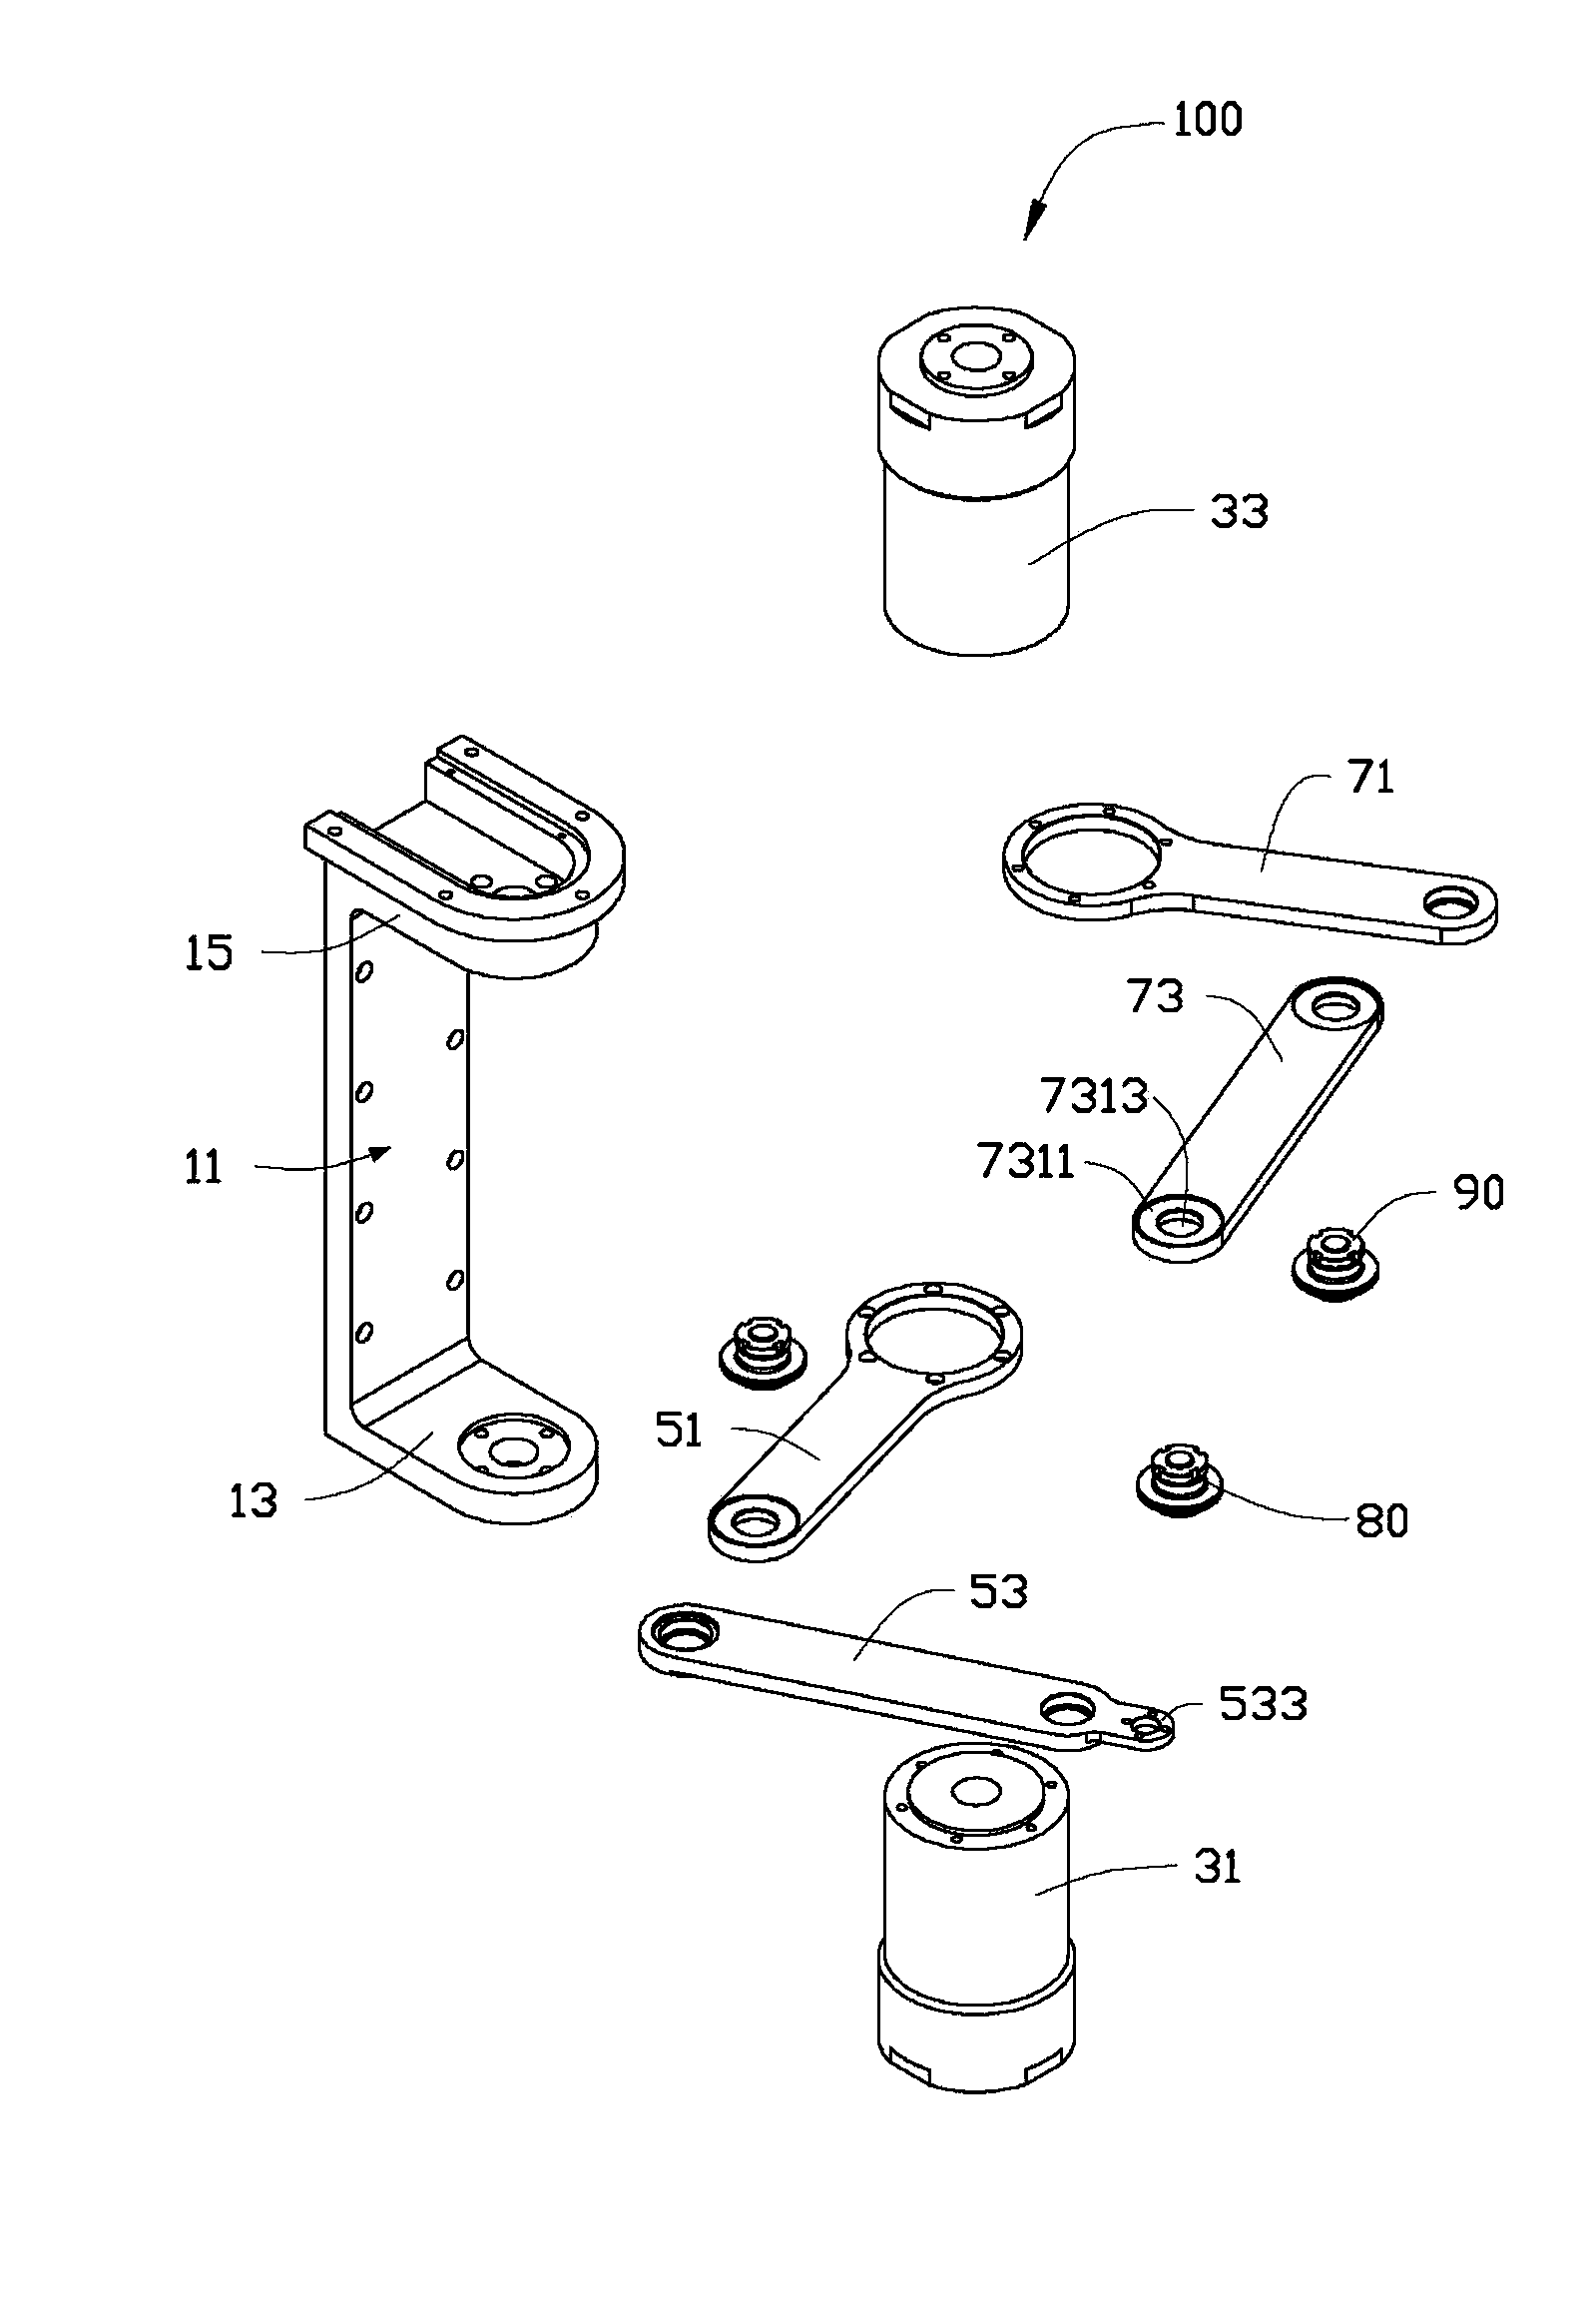 Carrying device